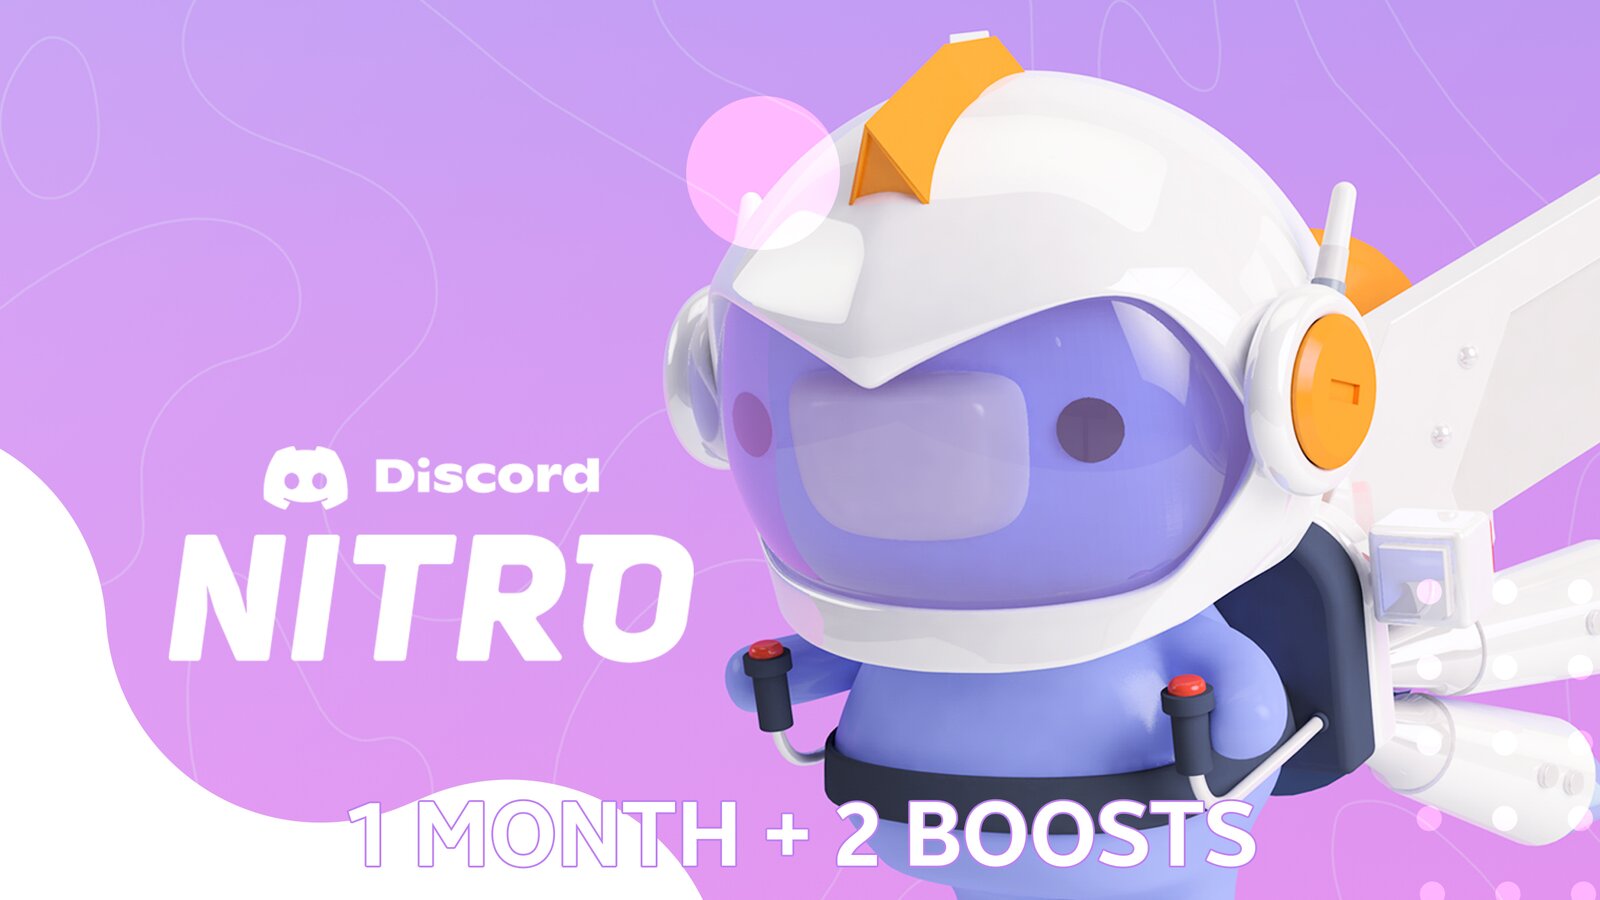 Discord Nitro: 1 Month + 2 Boosts (Trial)